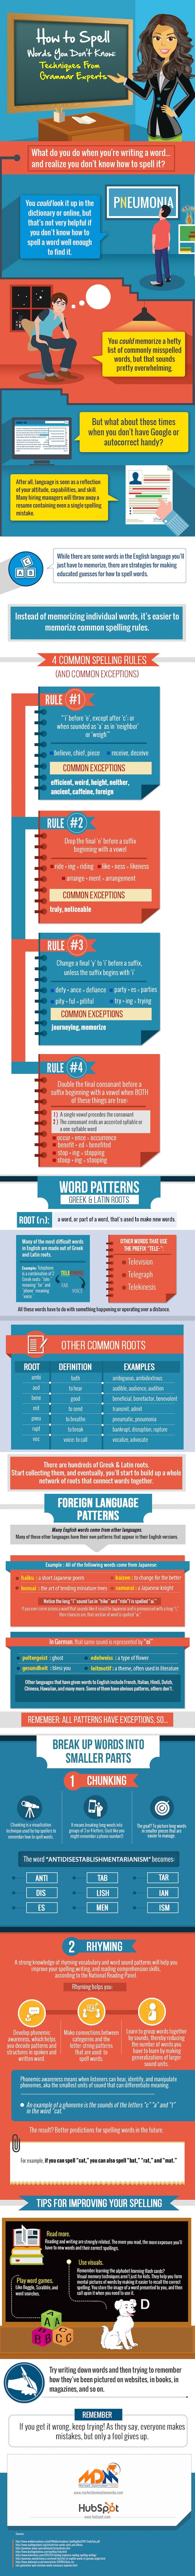 spelling-words-infographic